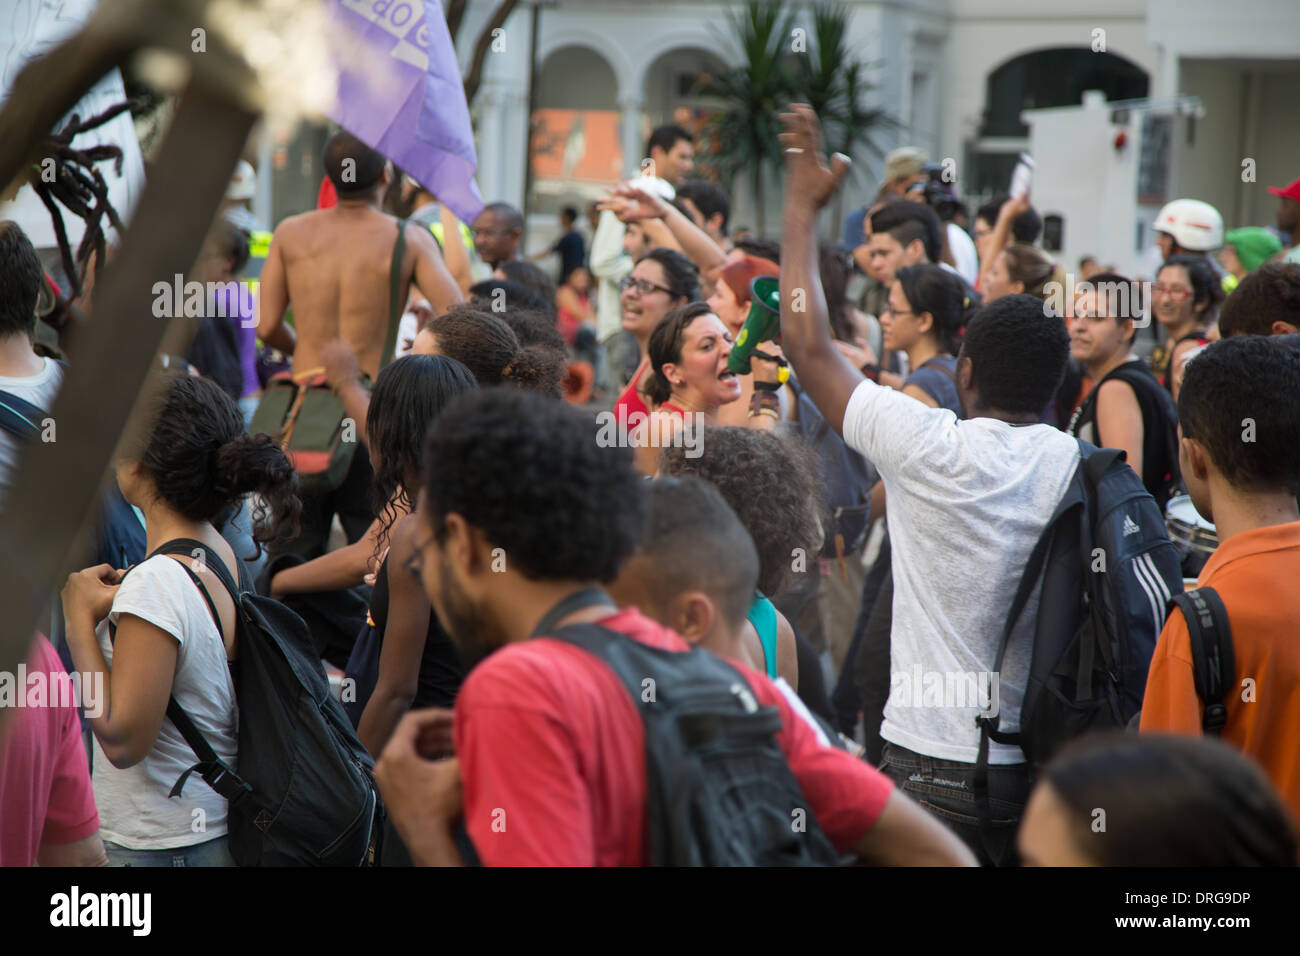 Sao Paulo, Brazil. 25th Jan, 2014. Protesters carry signs and shout slogans during a rally at Paulista Avenue in Sao Paulo against the World Cup in Brazil. People took to the street to complain about the costs of staging the World Cup in Brazil.  Credit:  Andre M. Chang/Alamy Live News Stock Photo